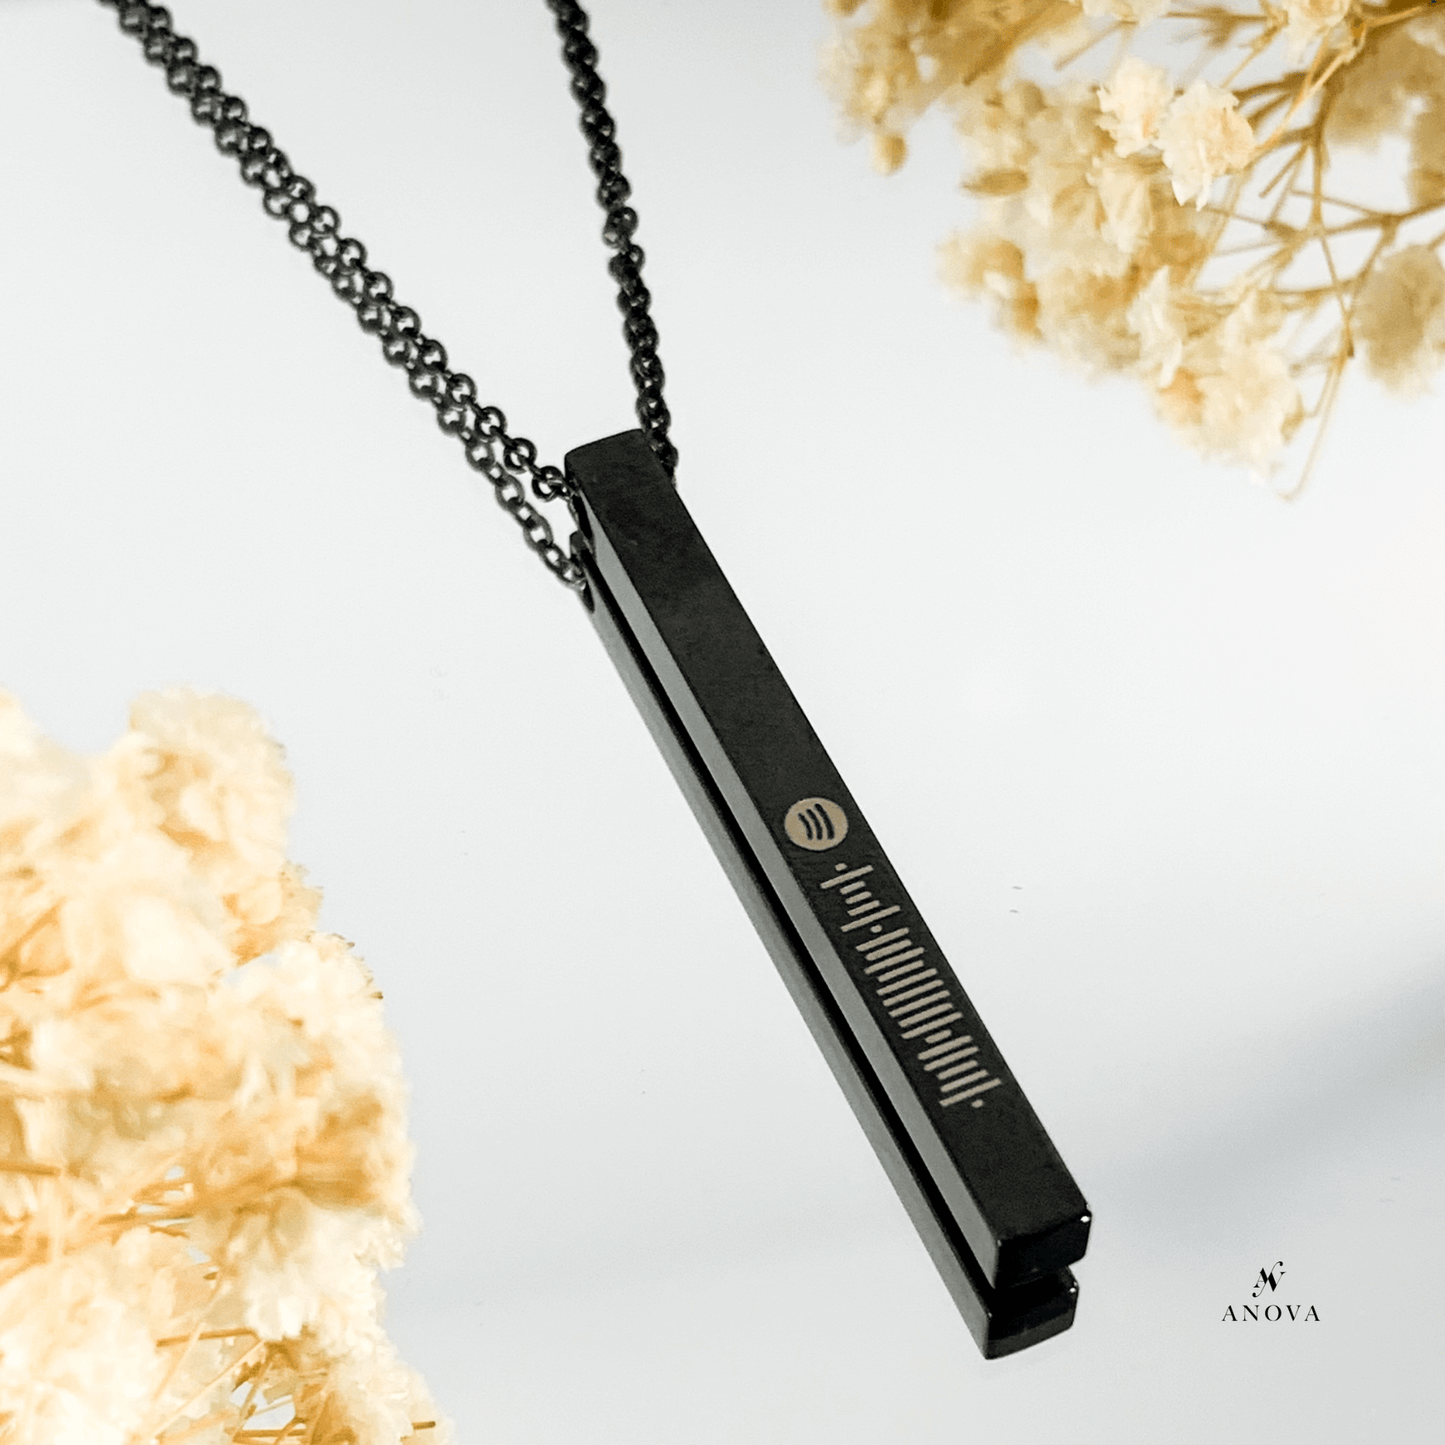 Spotify Code Bar Necklace